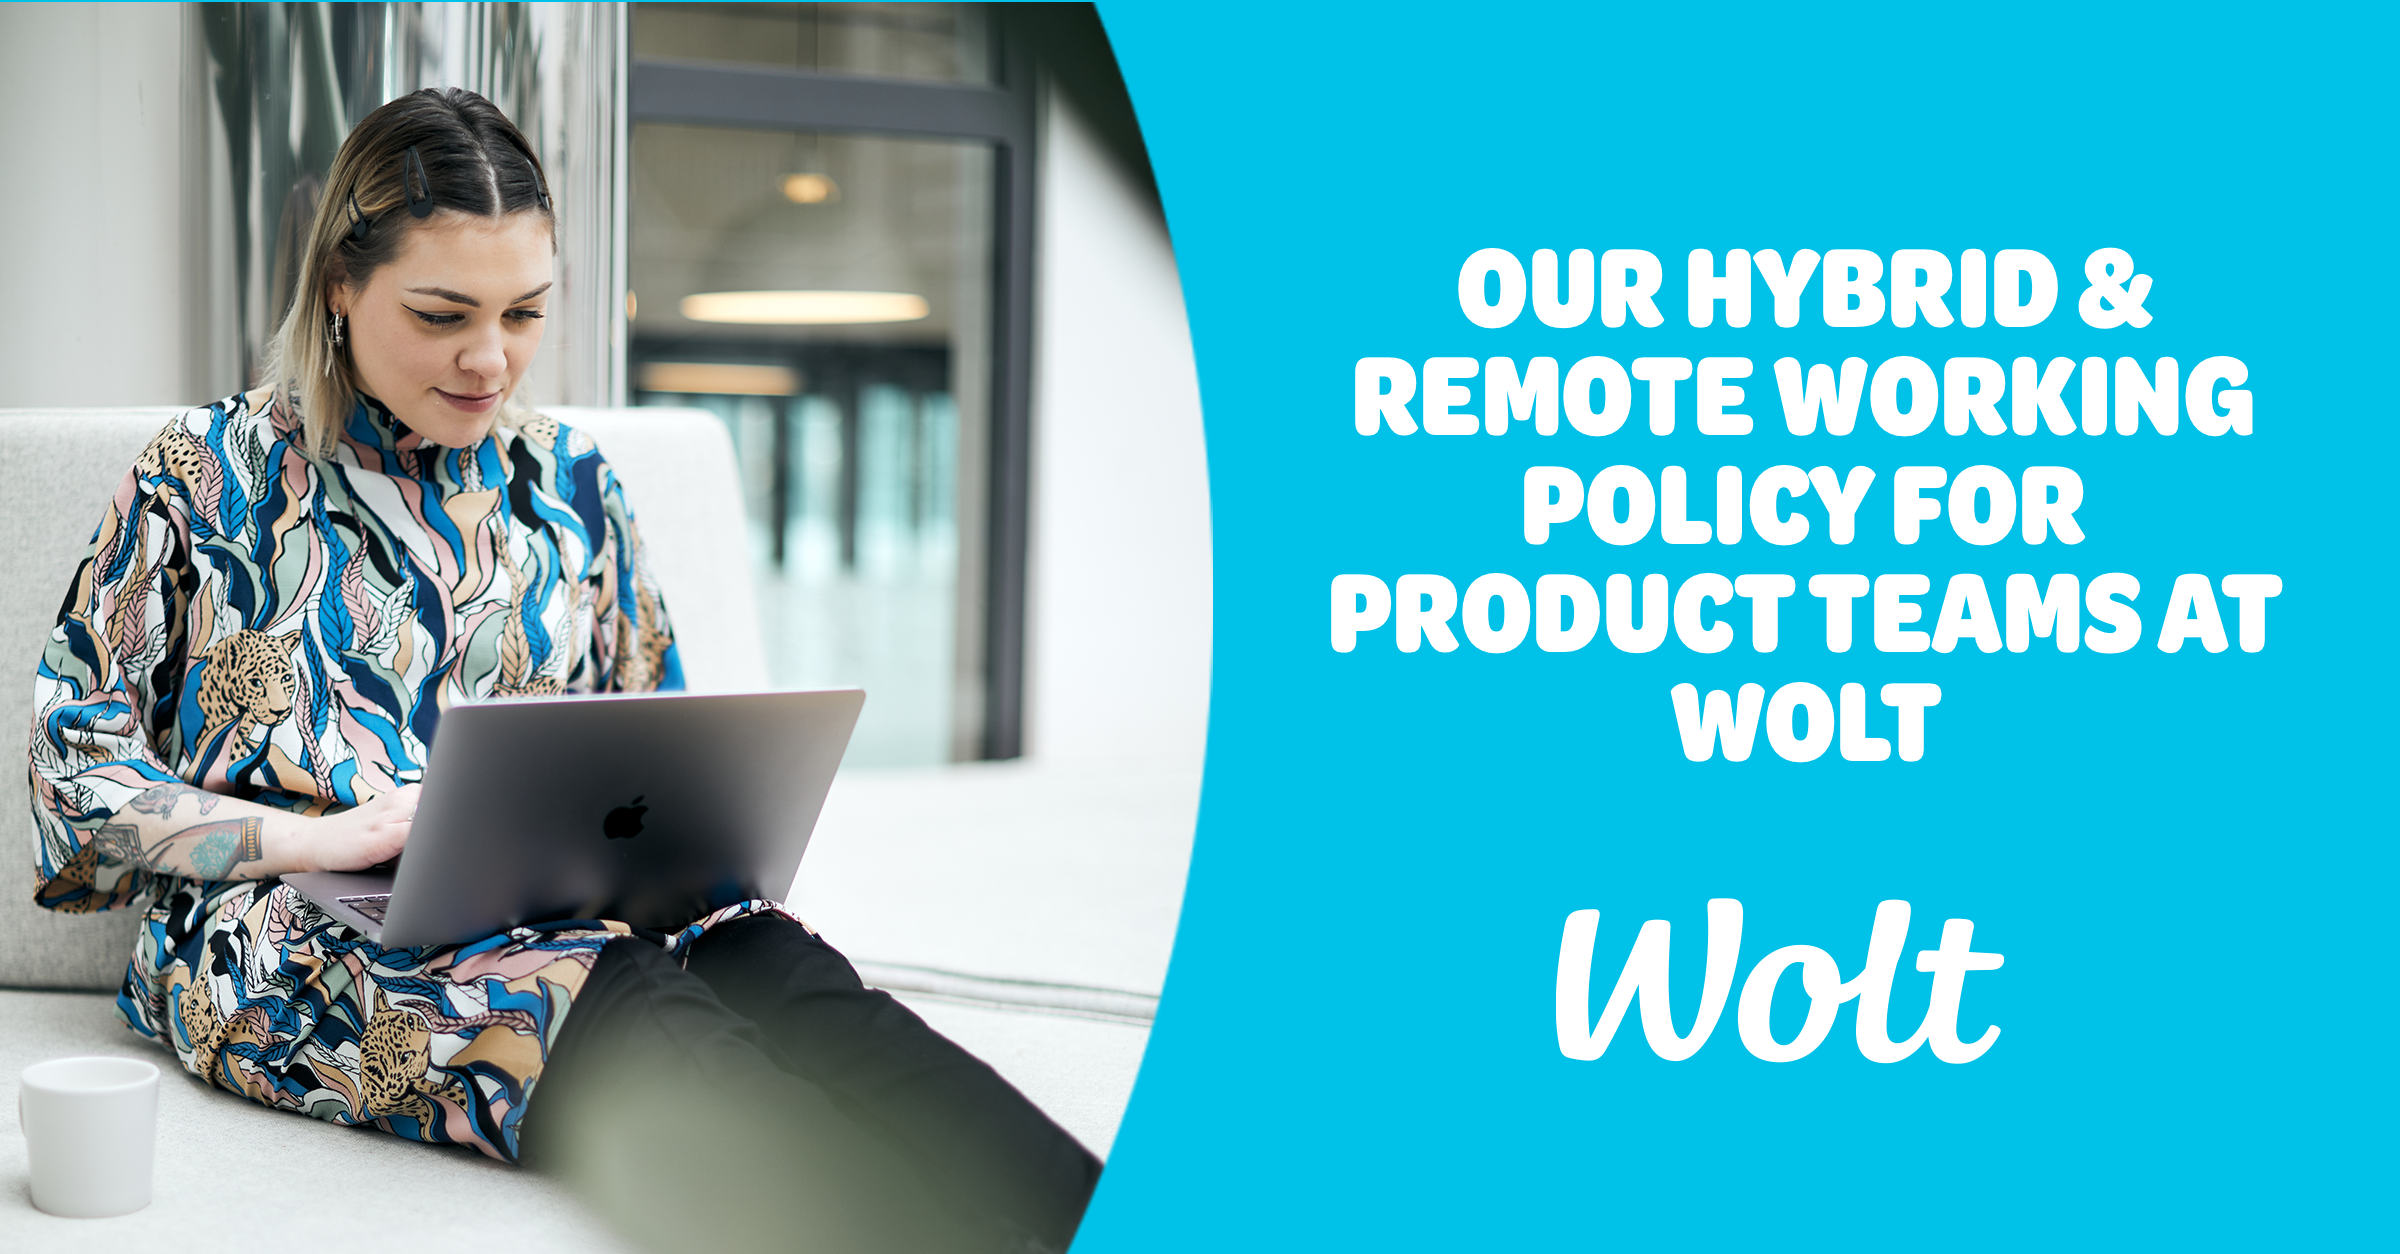 Our hybrid & remote working policy for product teams at Wolt